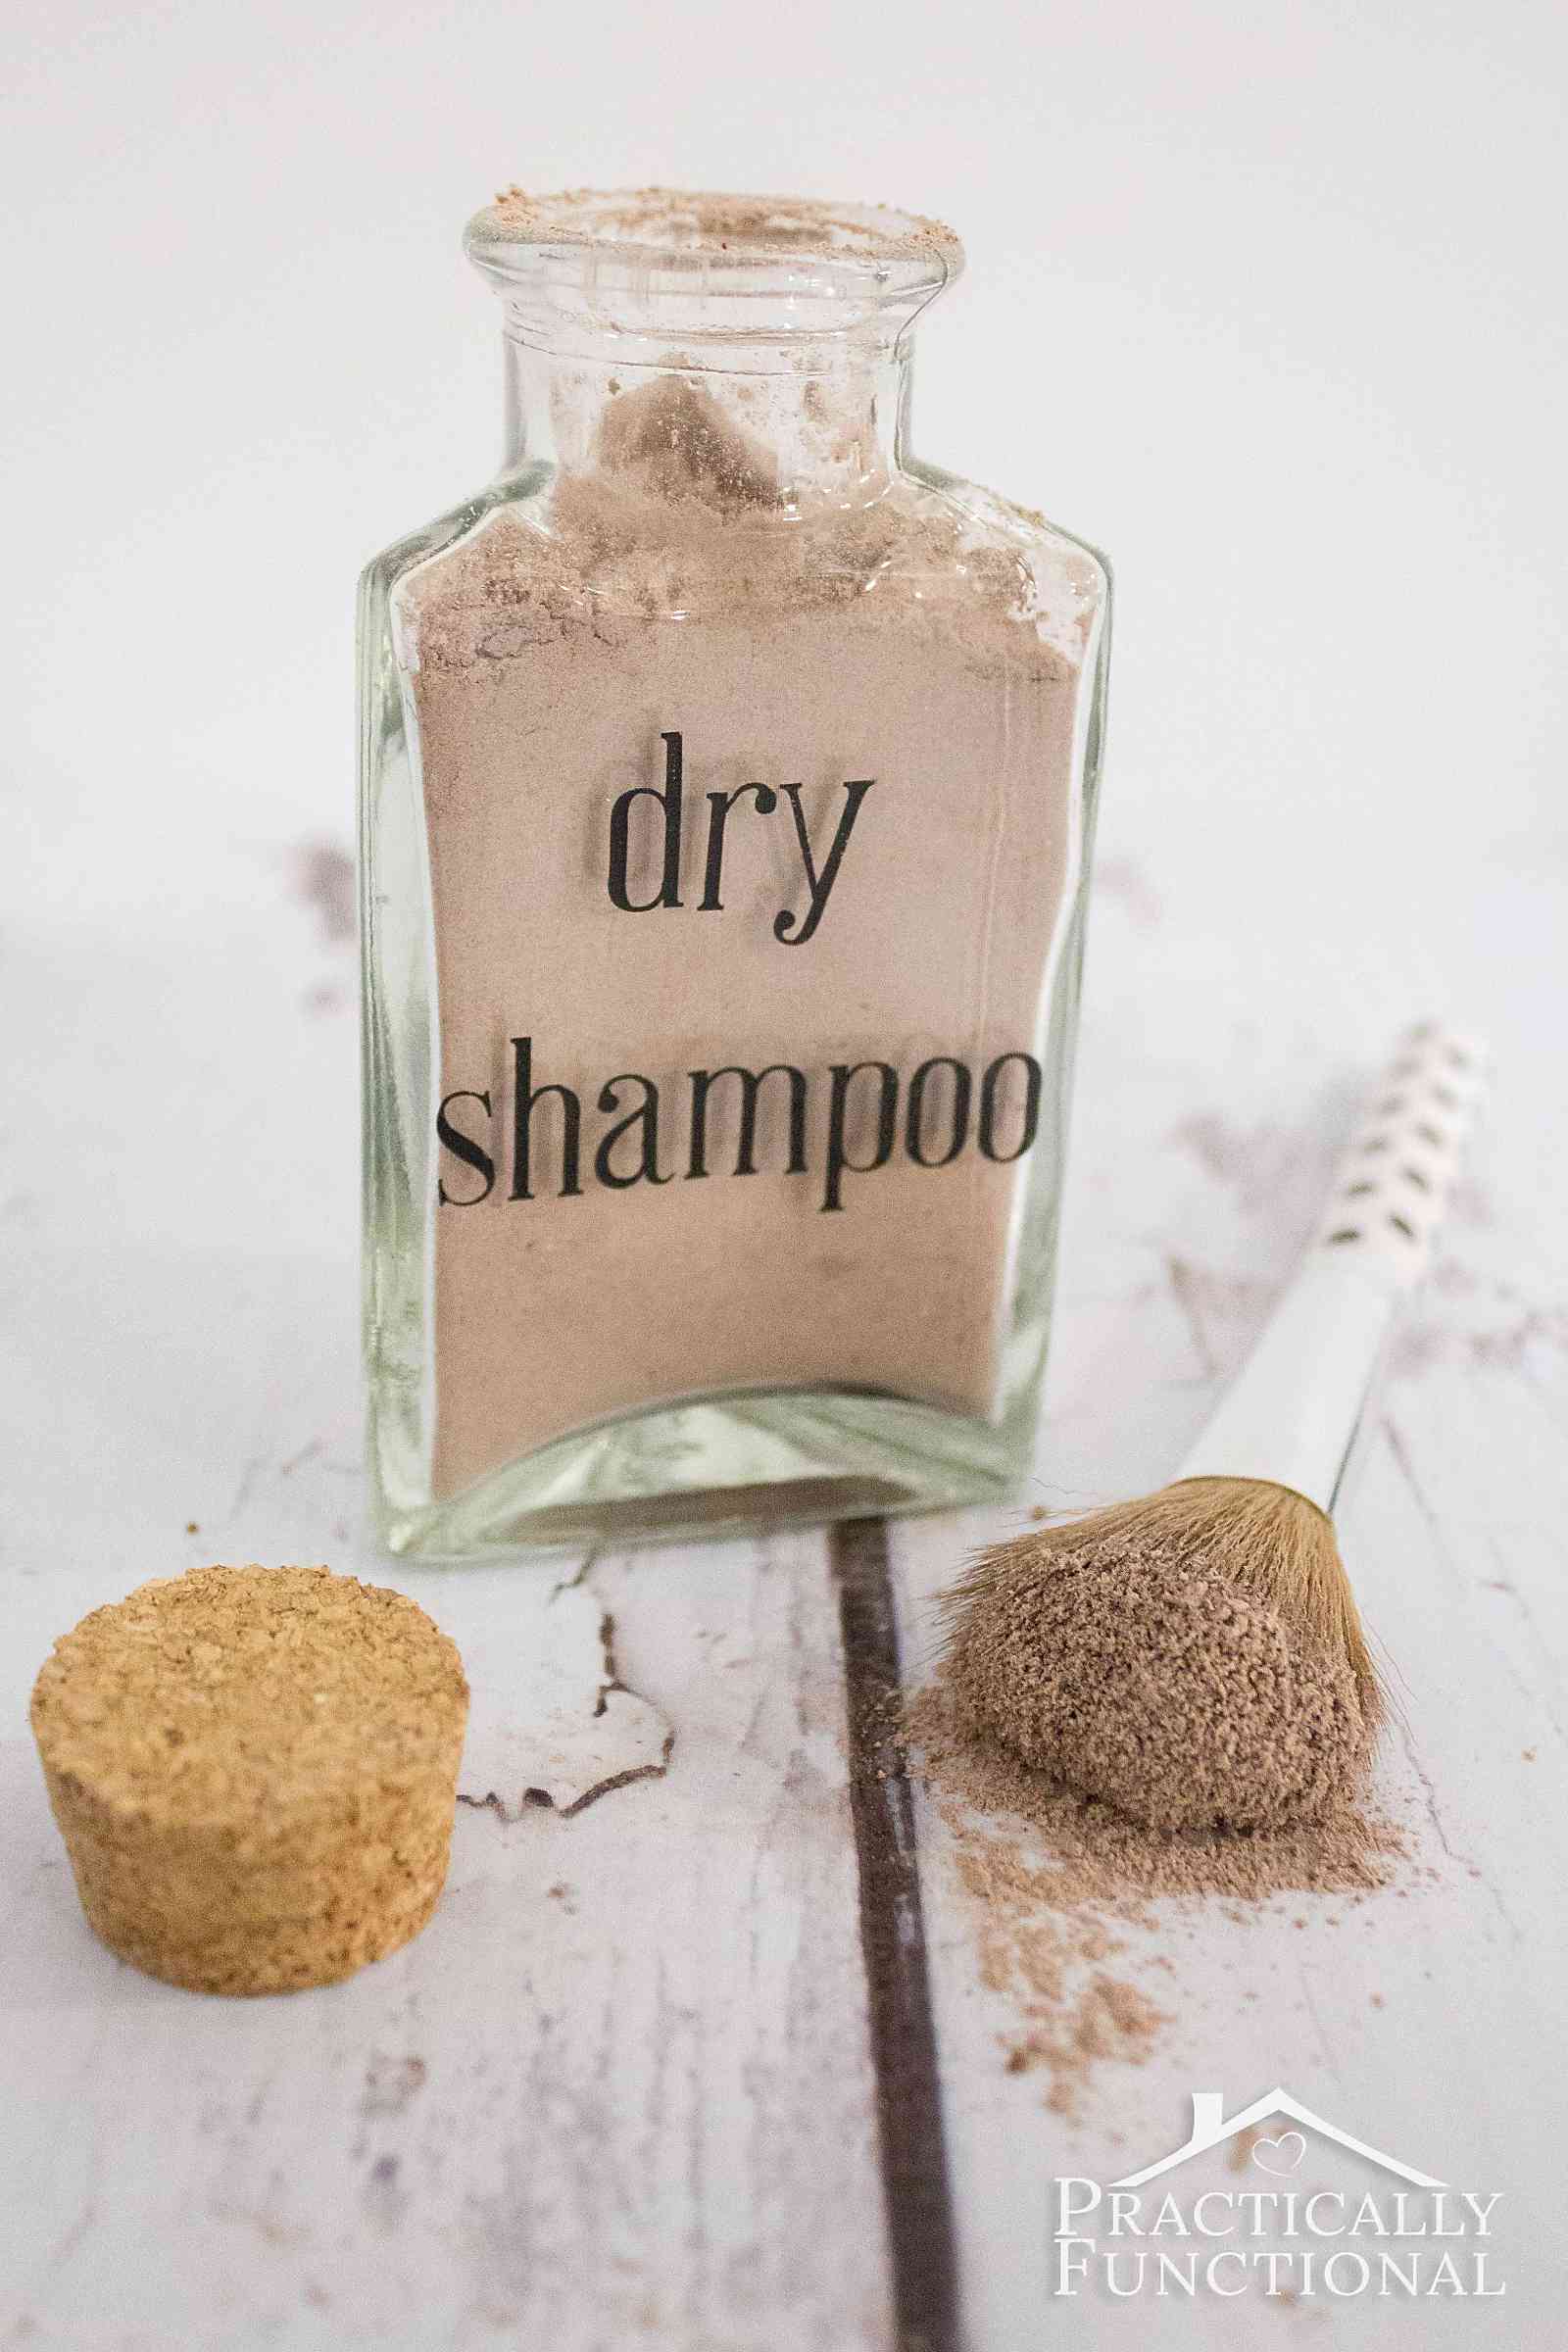 This is my favorite DIY dry shampoo recipe for dark hair; gets rid of the greasy shine and adds a ton of volume so you can style your hair just like normal! (Works for light hair too, just leave out the cocoa powder)